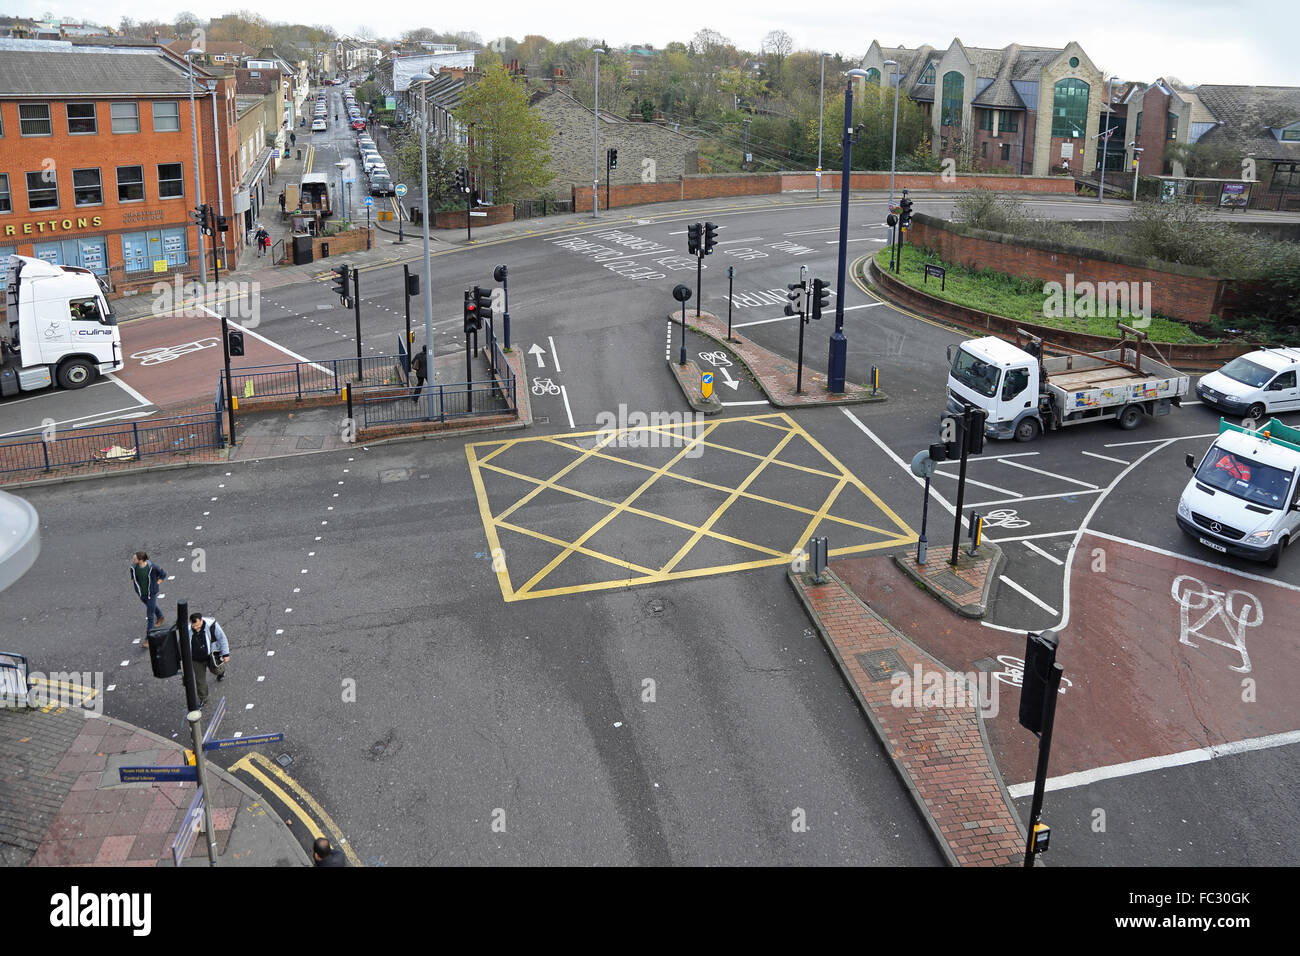 High level view of the Walthamstow Central gyratory system in North East London, UK. Shows box junction and cycle zones. Stock Photo